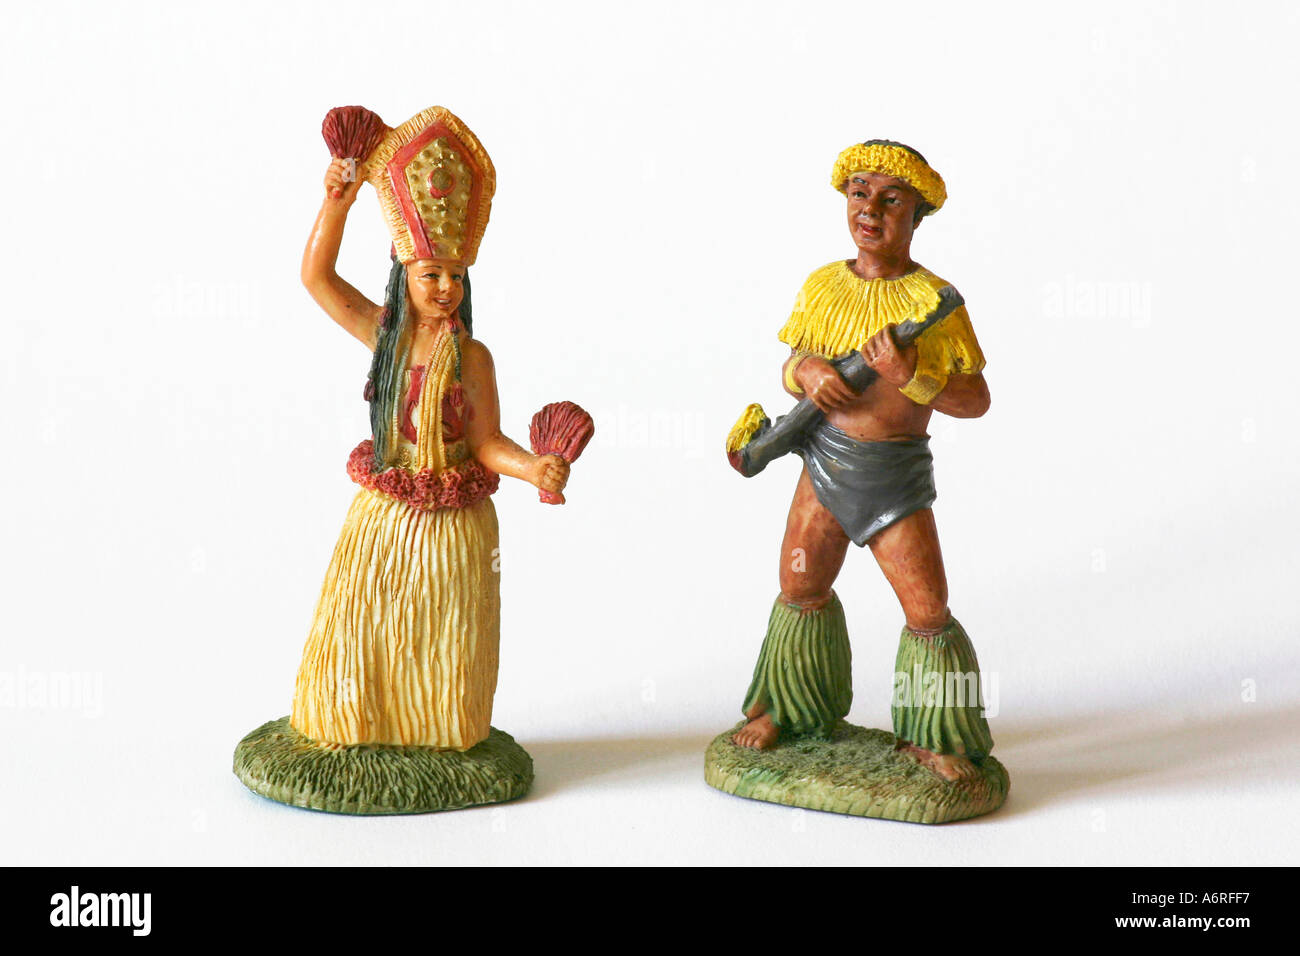 Male and female ceramic Hawaiian figurine statues or dolls in traditional native clothing and hula skirt Stock Photo